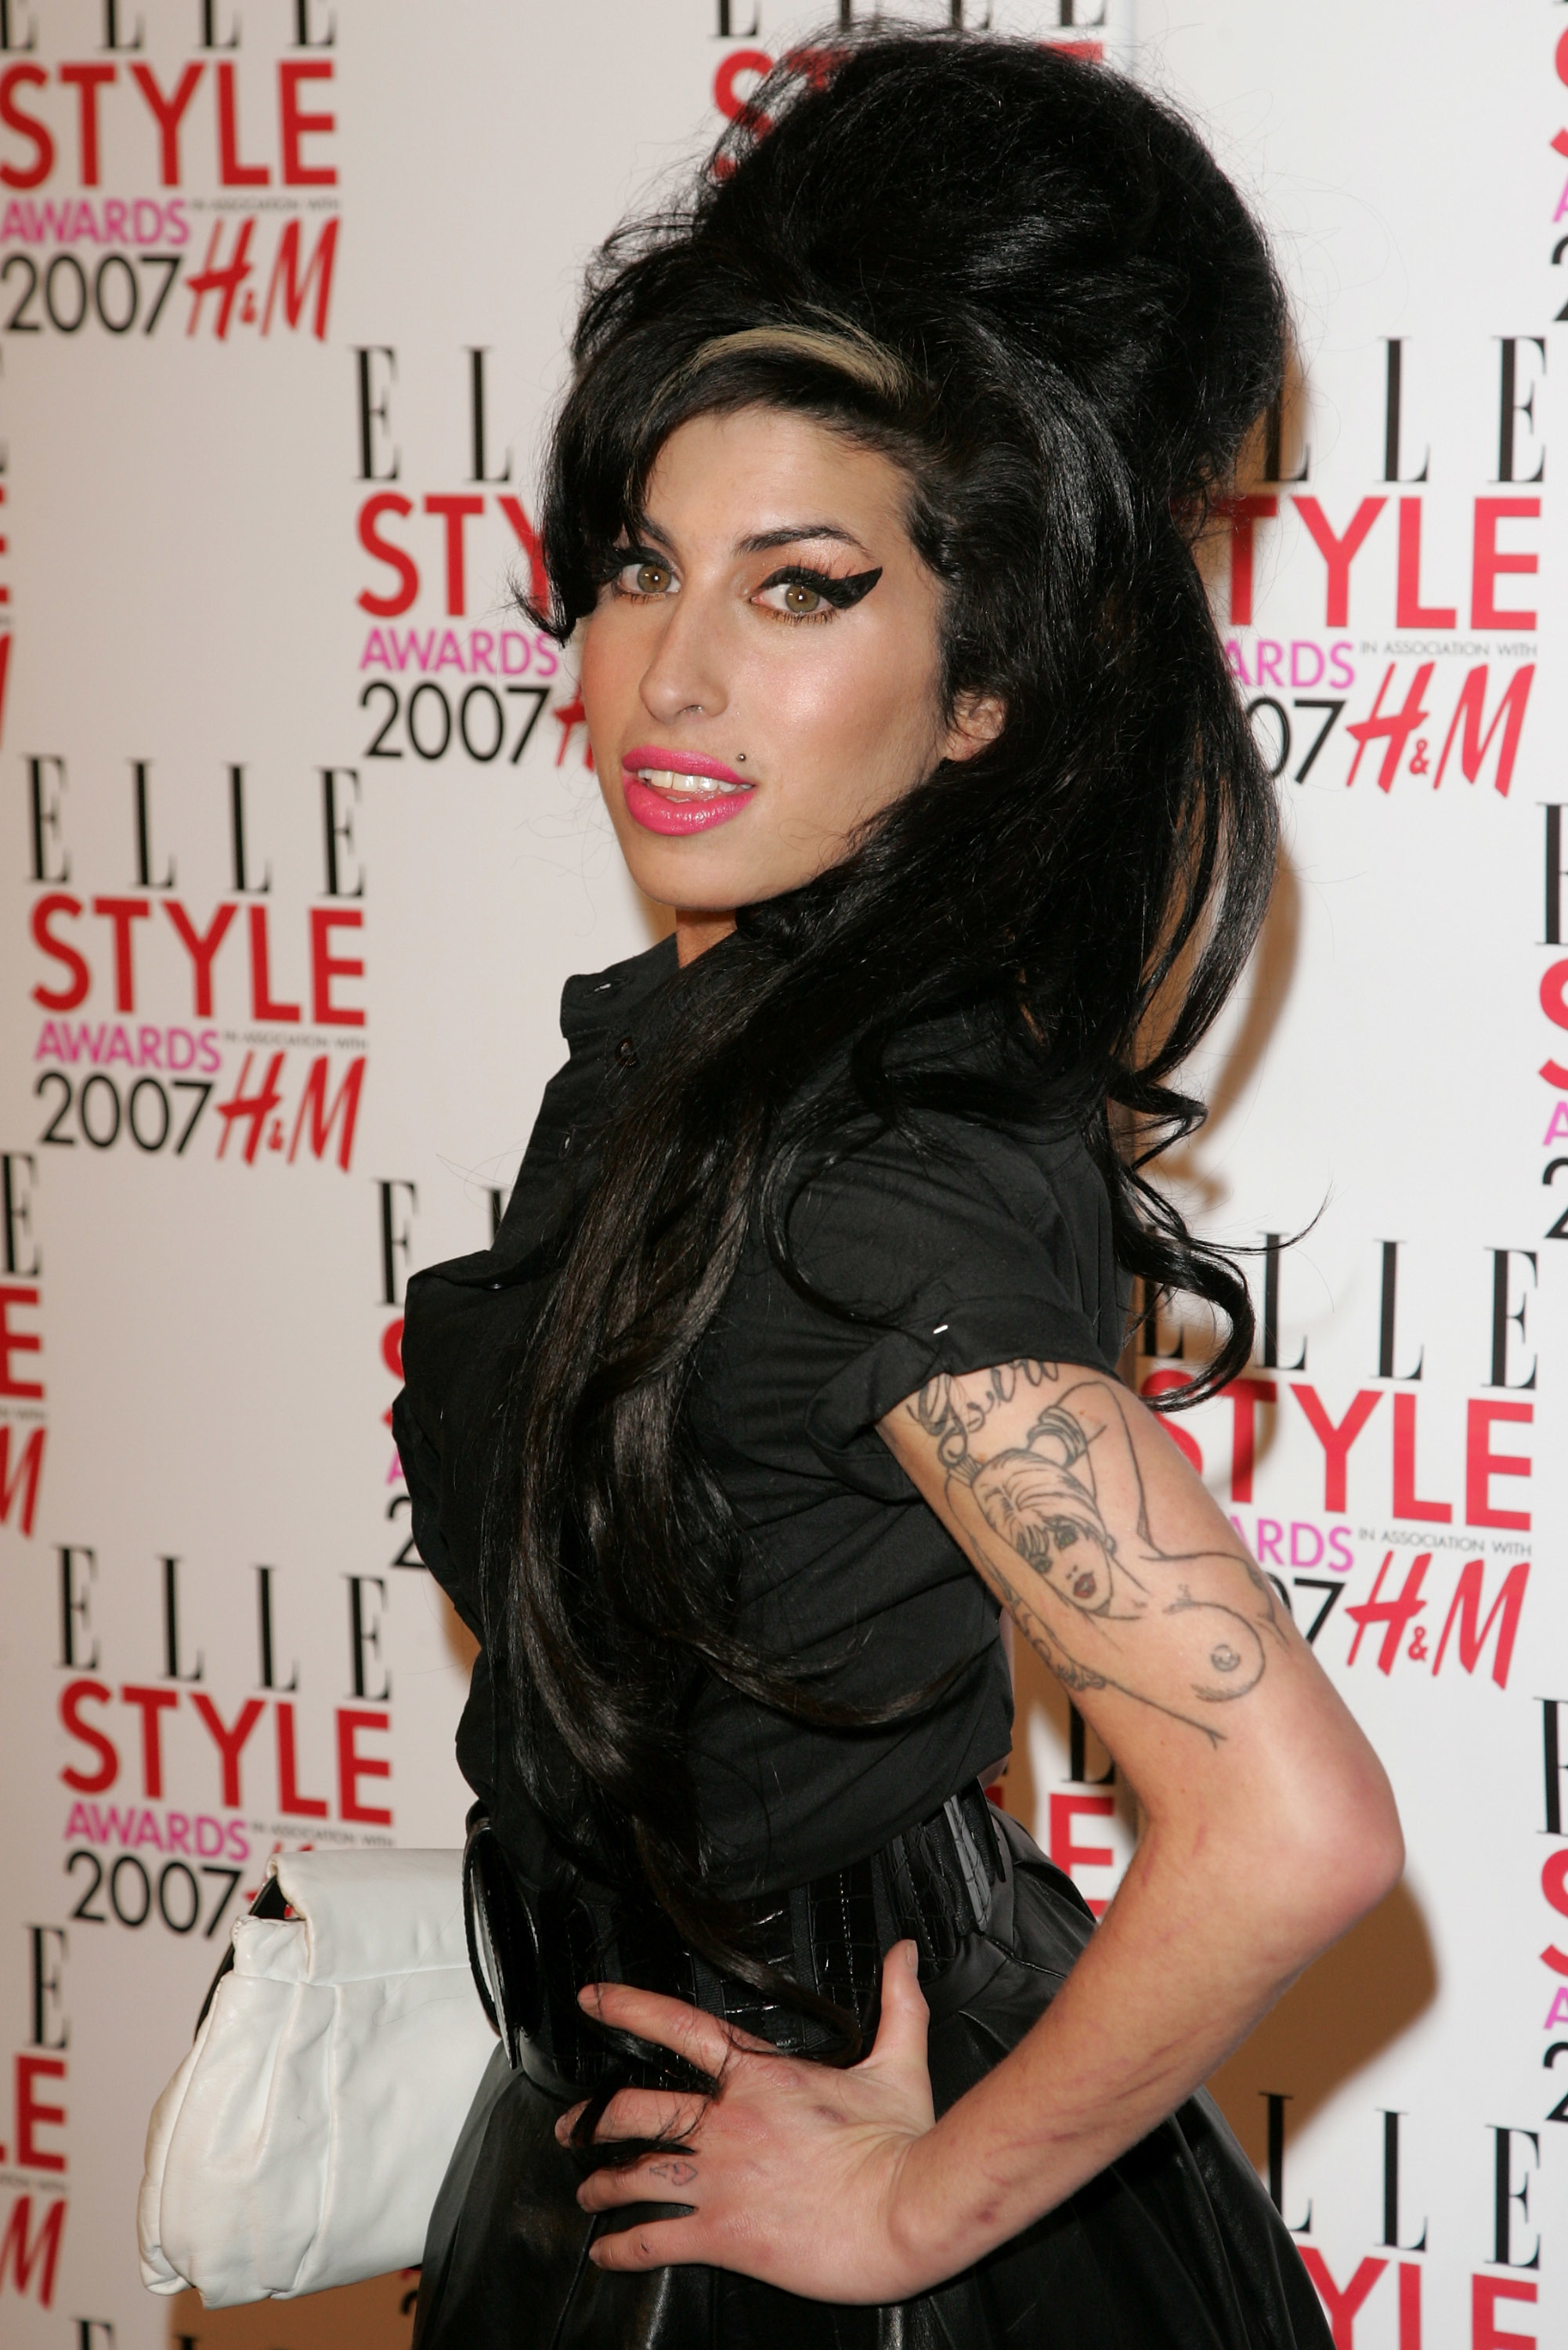 Amy Winehouse's 'Back to Black': 10 Things You Didn't Know